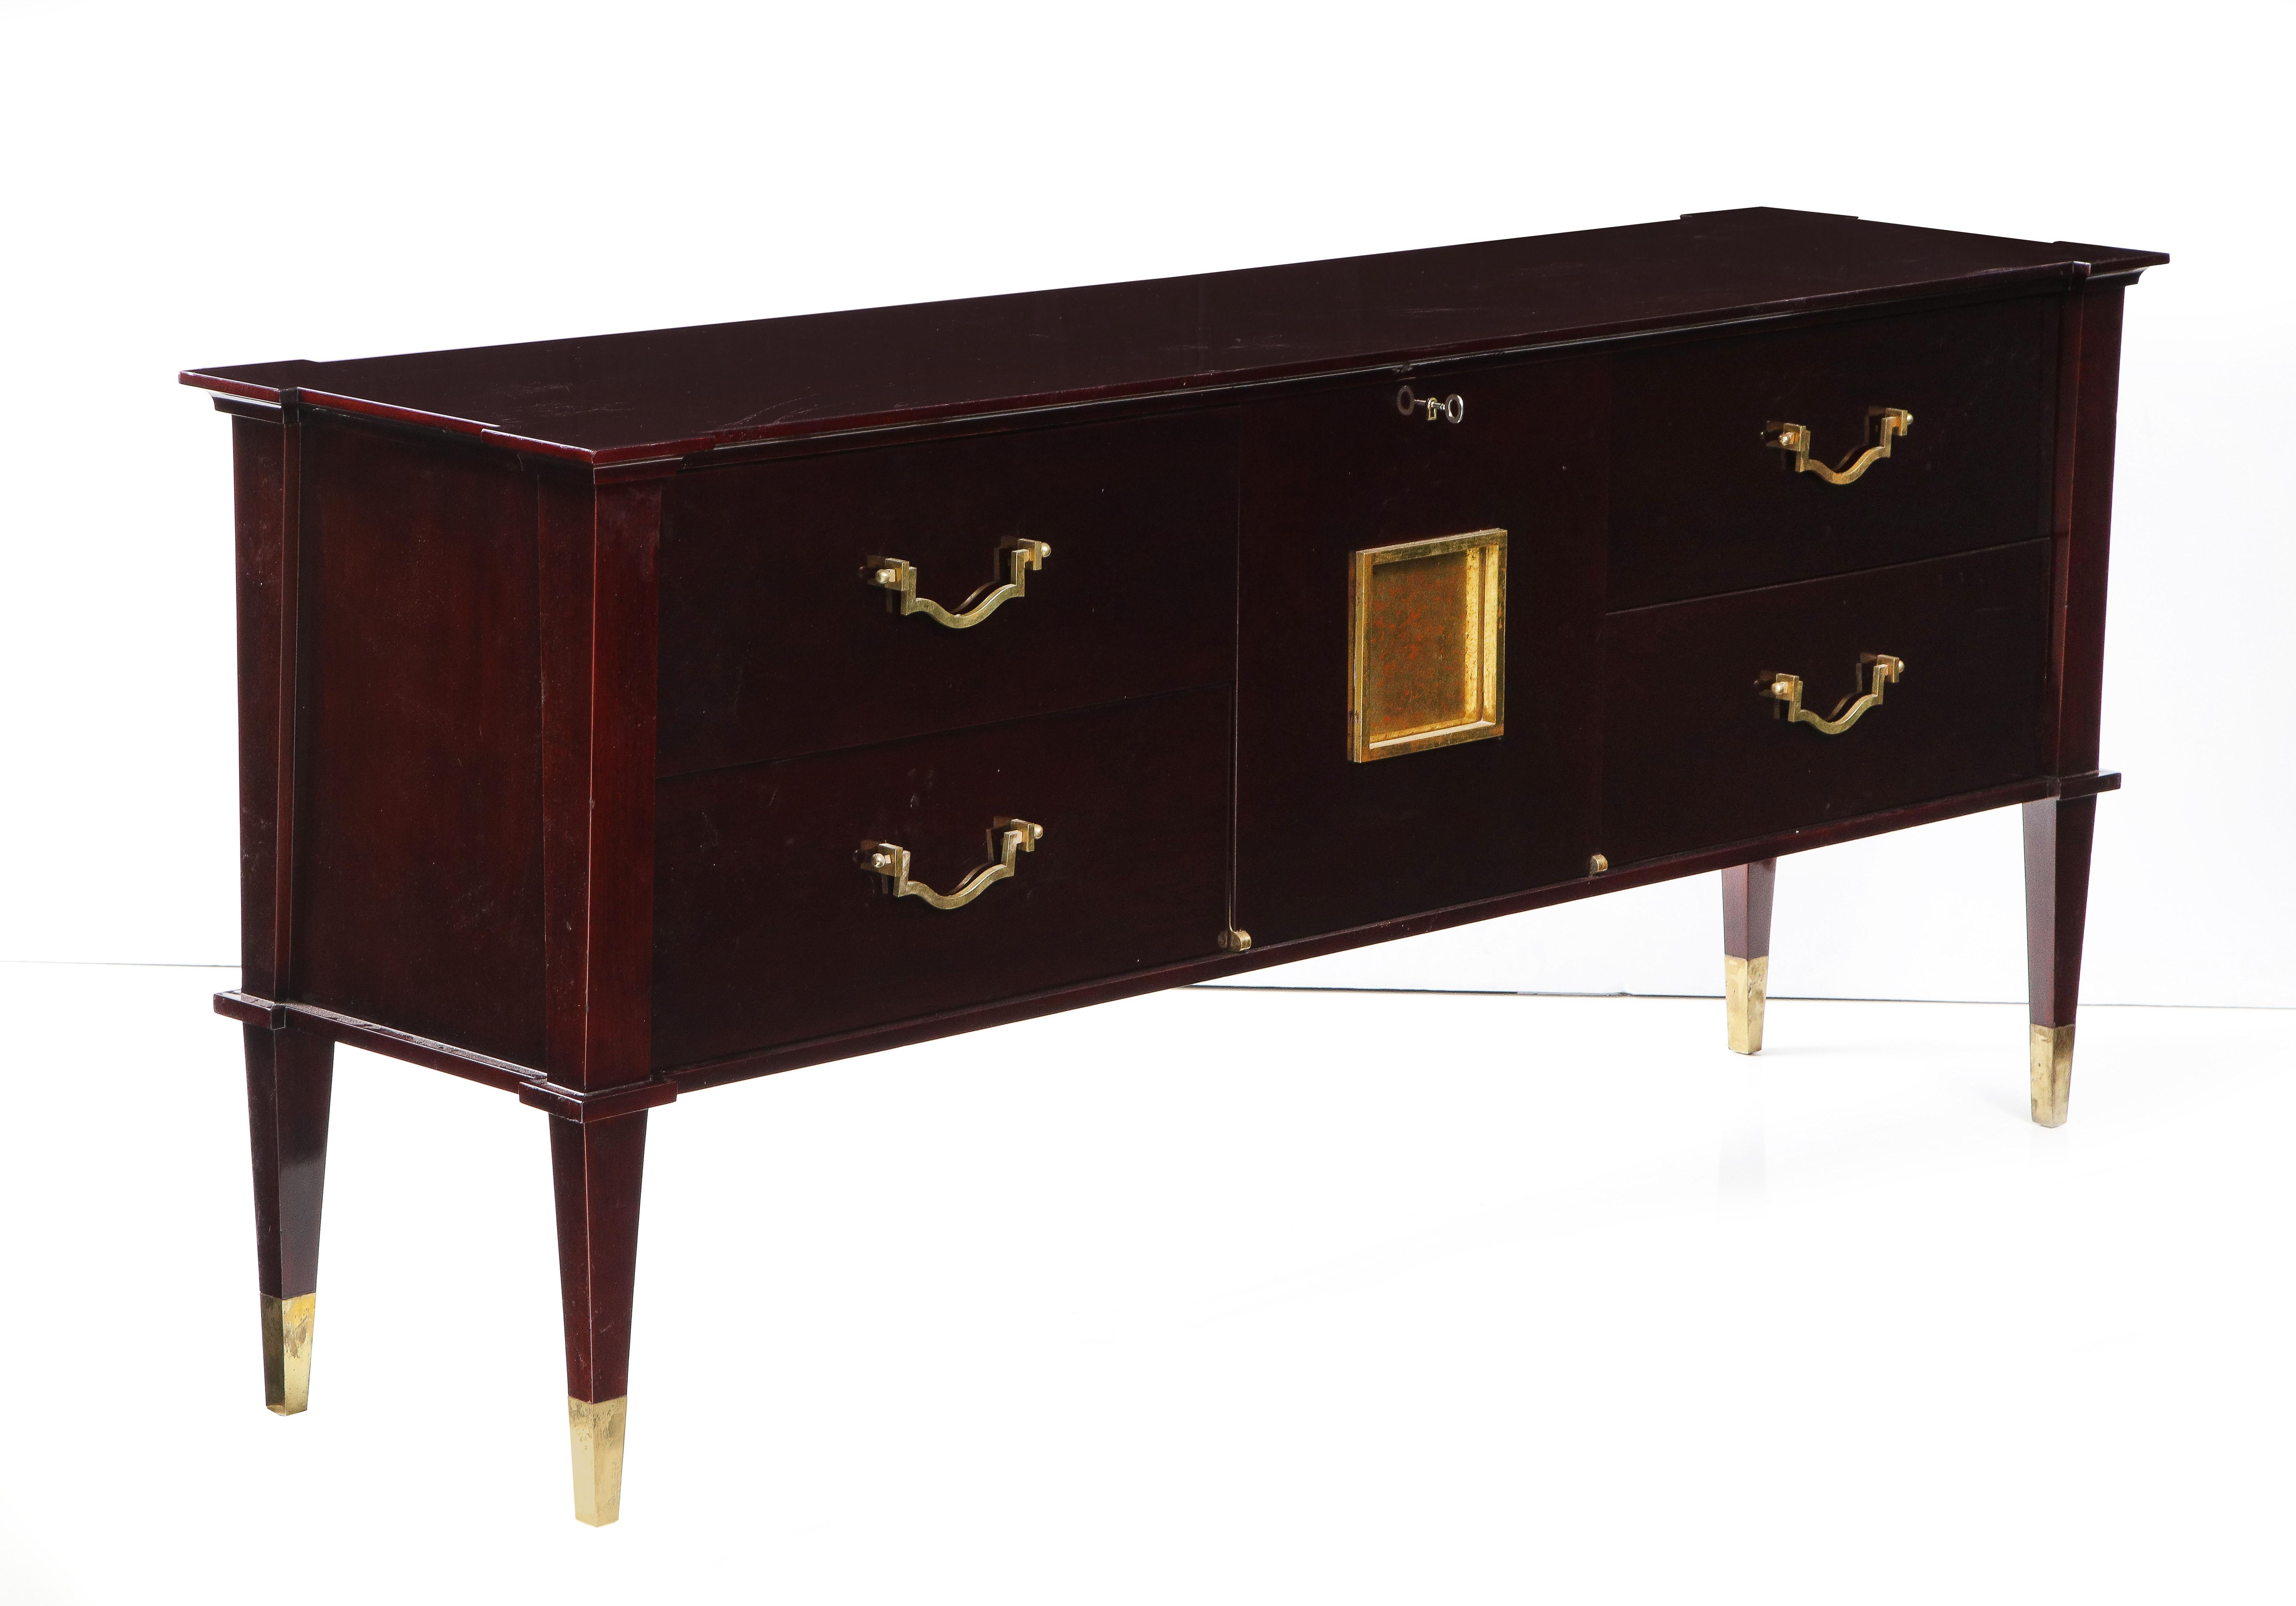 Lacquered mahogany cabinet by Roberto & Mito Block with gilt brass handles.